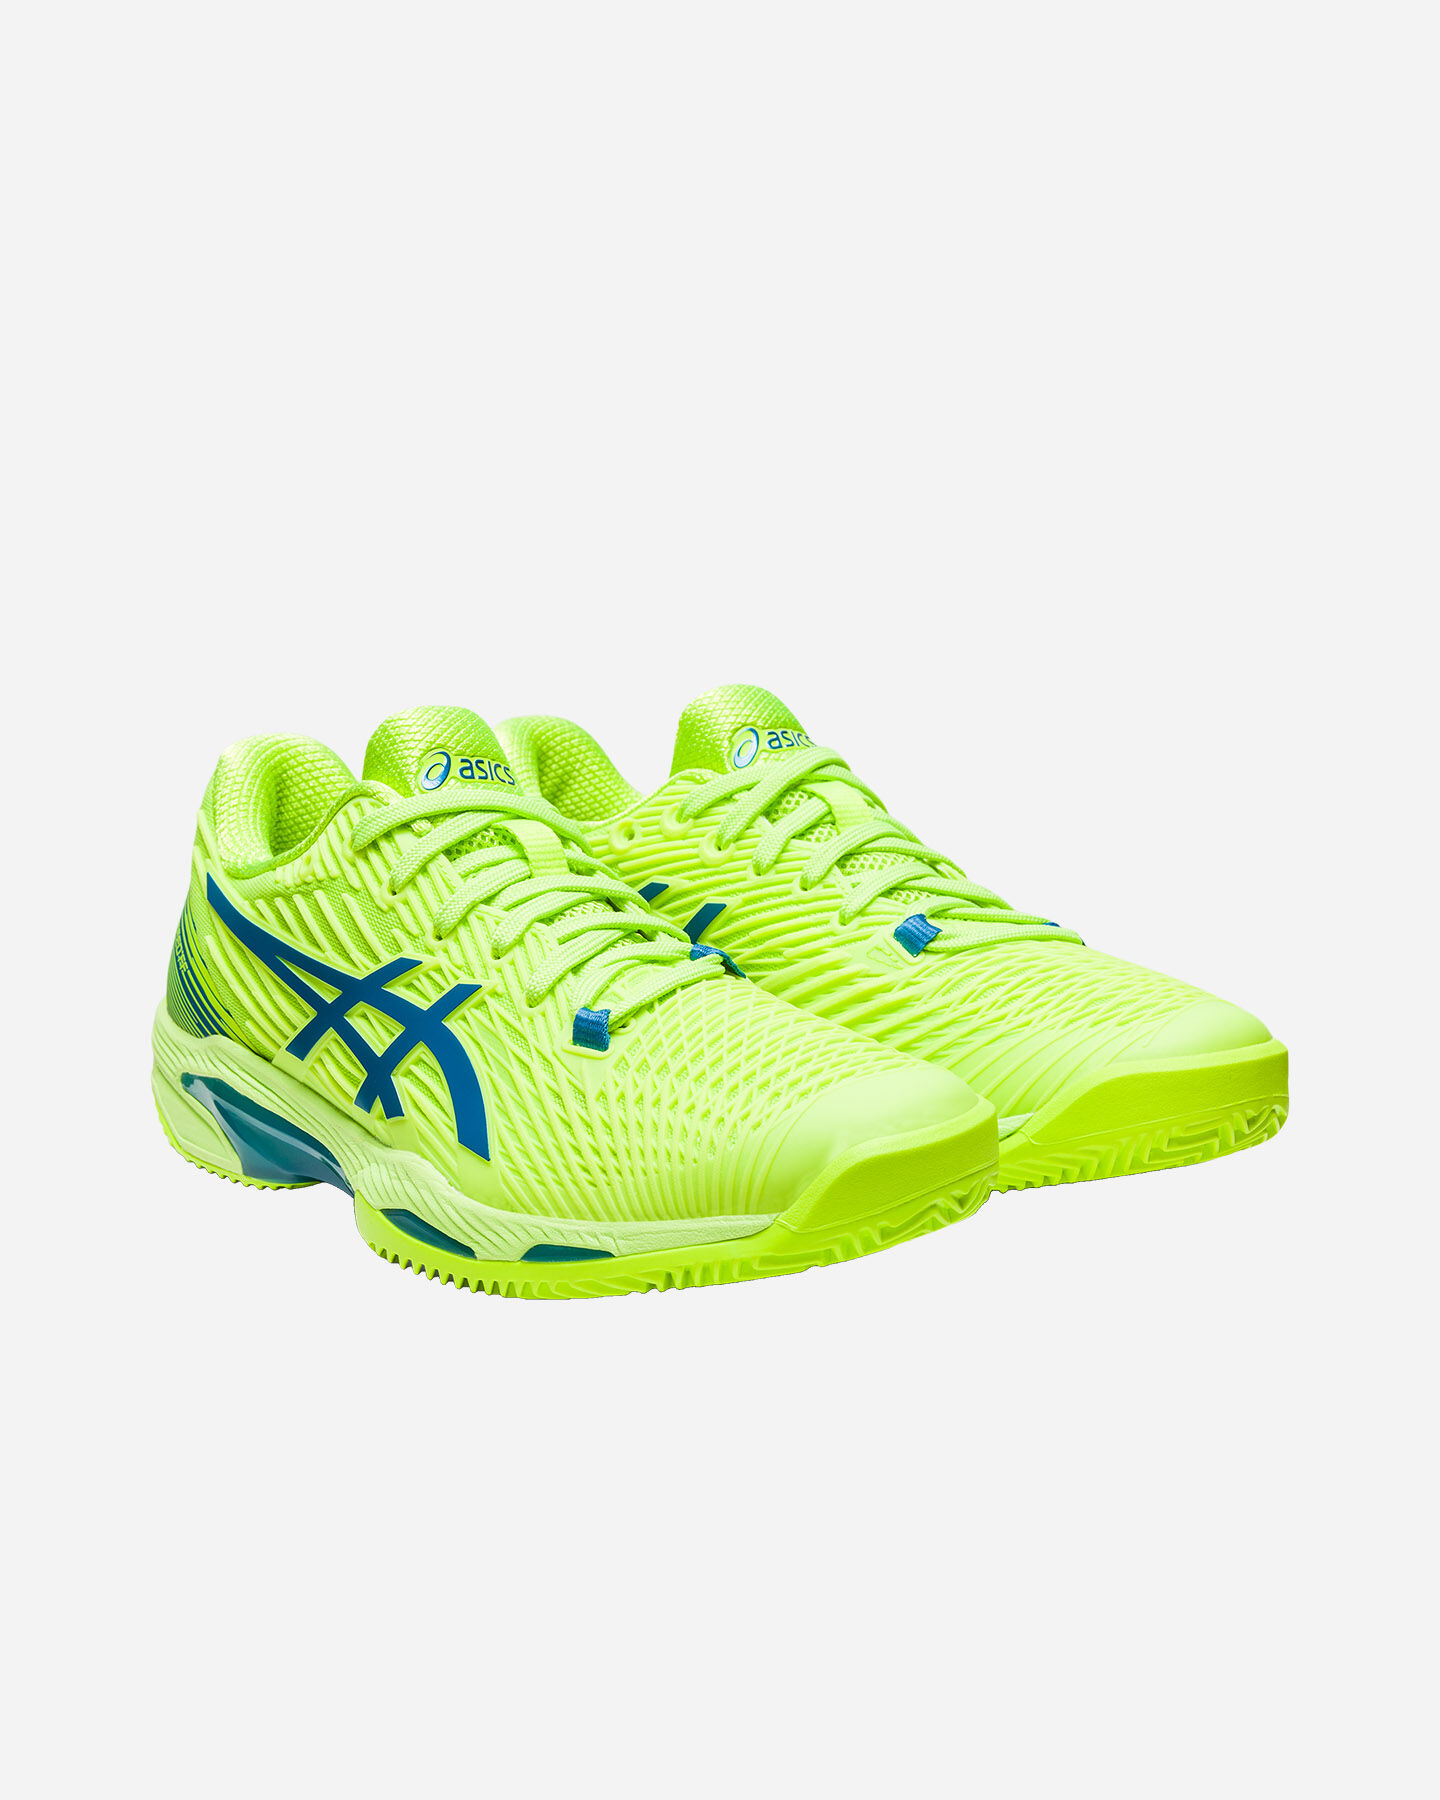  Scarpe tennis ASICS SOLUTION SPEED FF 2 CLAY W S5526077|300|5 scatto 1